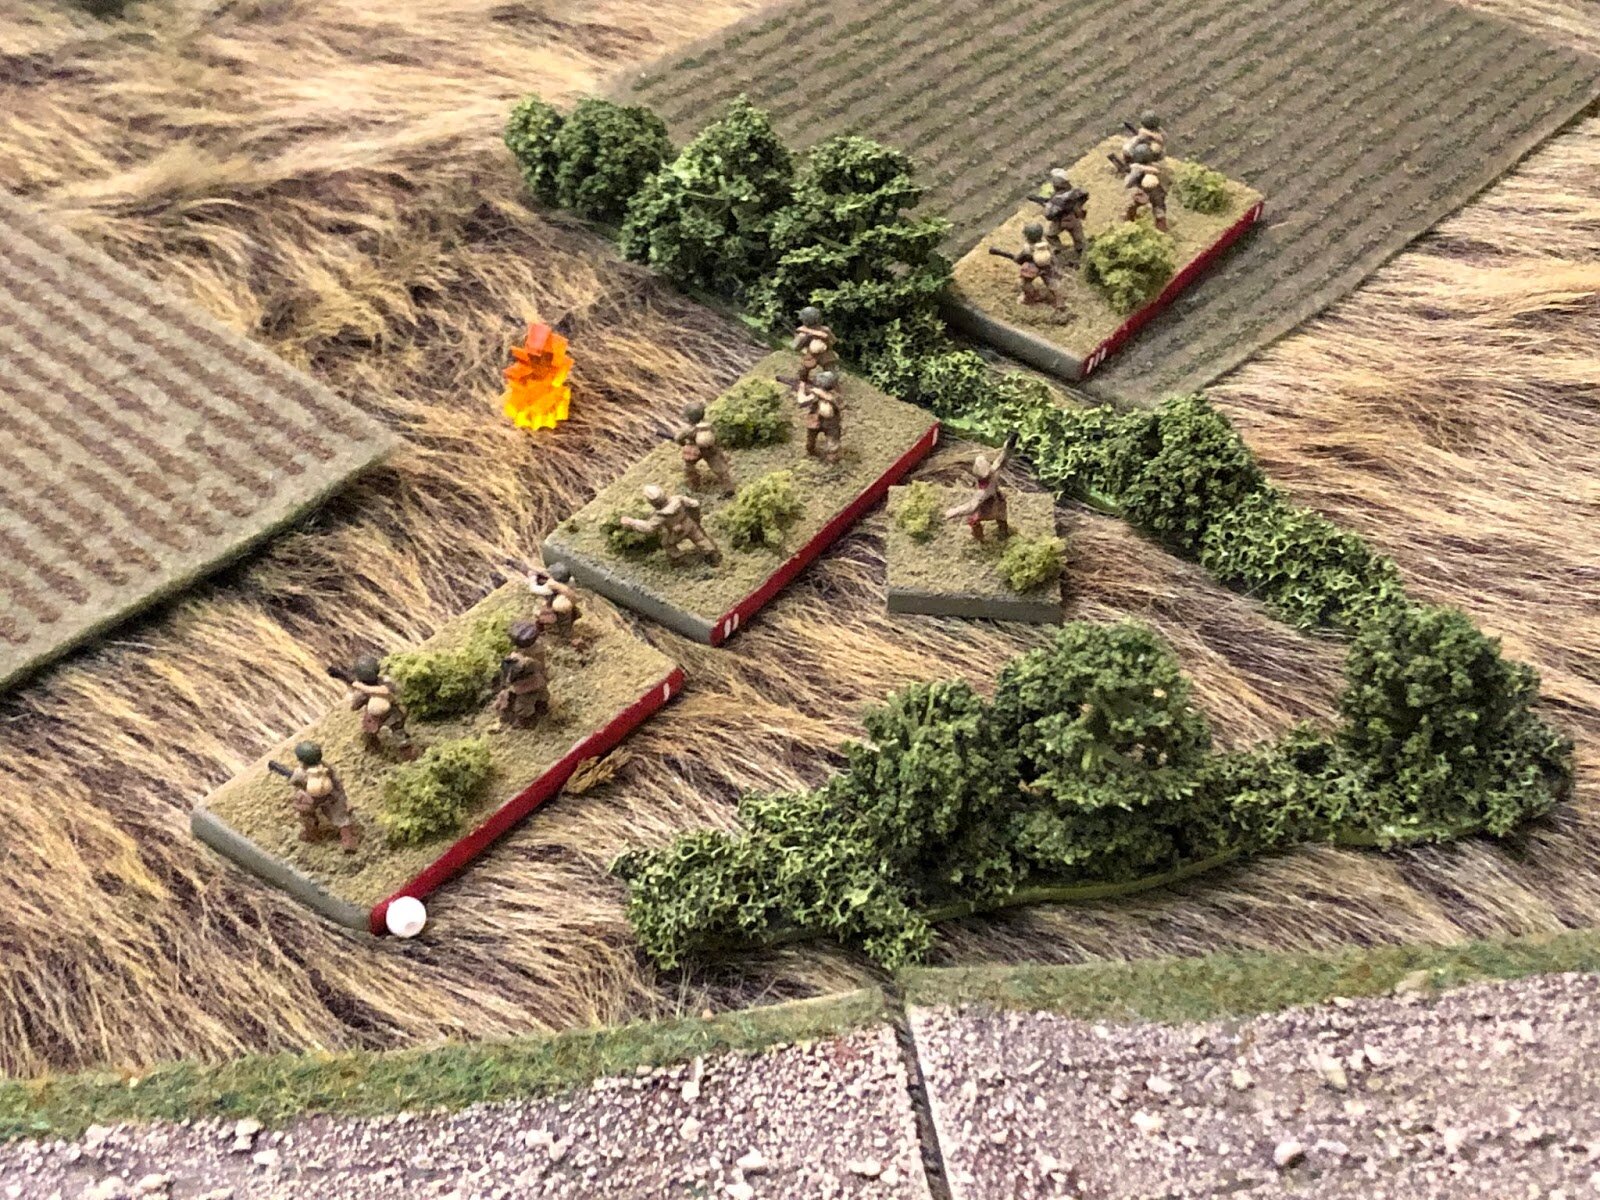  Putting the Soviet 1st Squad, 1st Platoon 'men down.' But there's a screeching sound and all eyes turn skyward... 